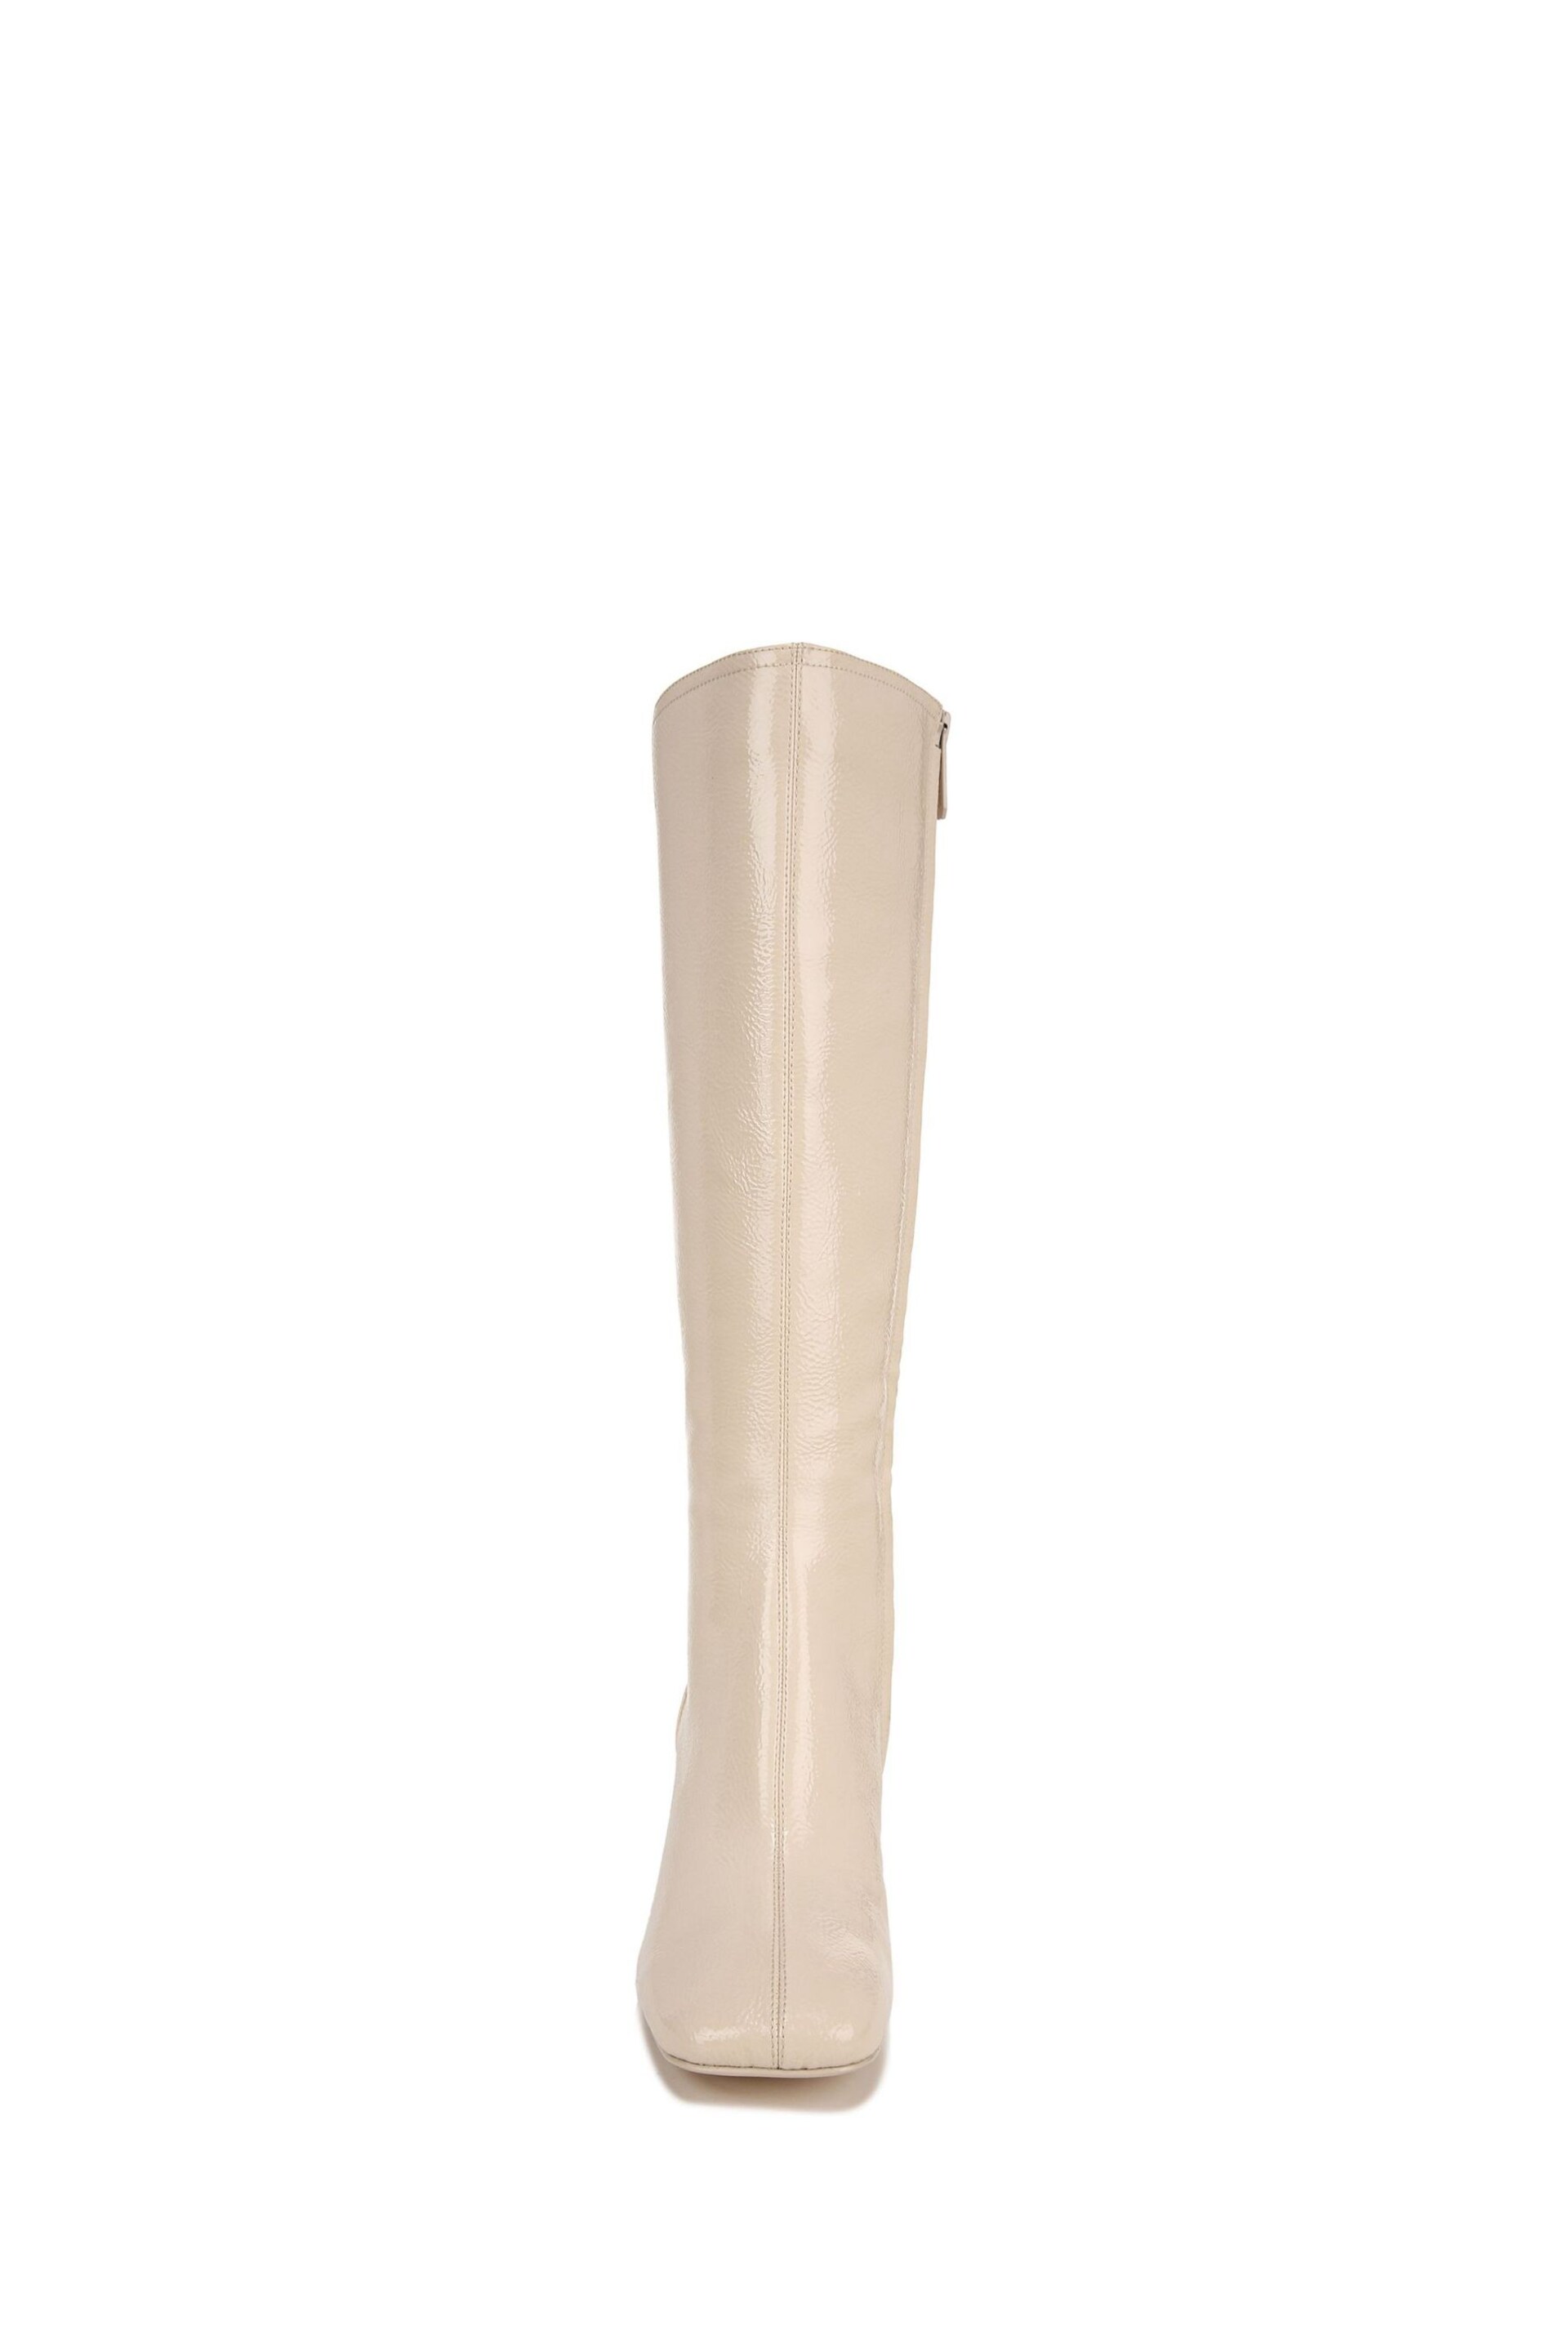 Circus NY Cream Olympia Knee High Boots - Image 5 of 7